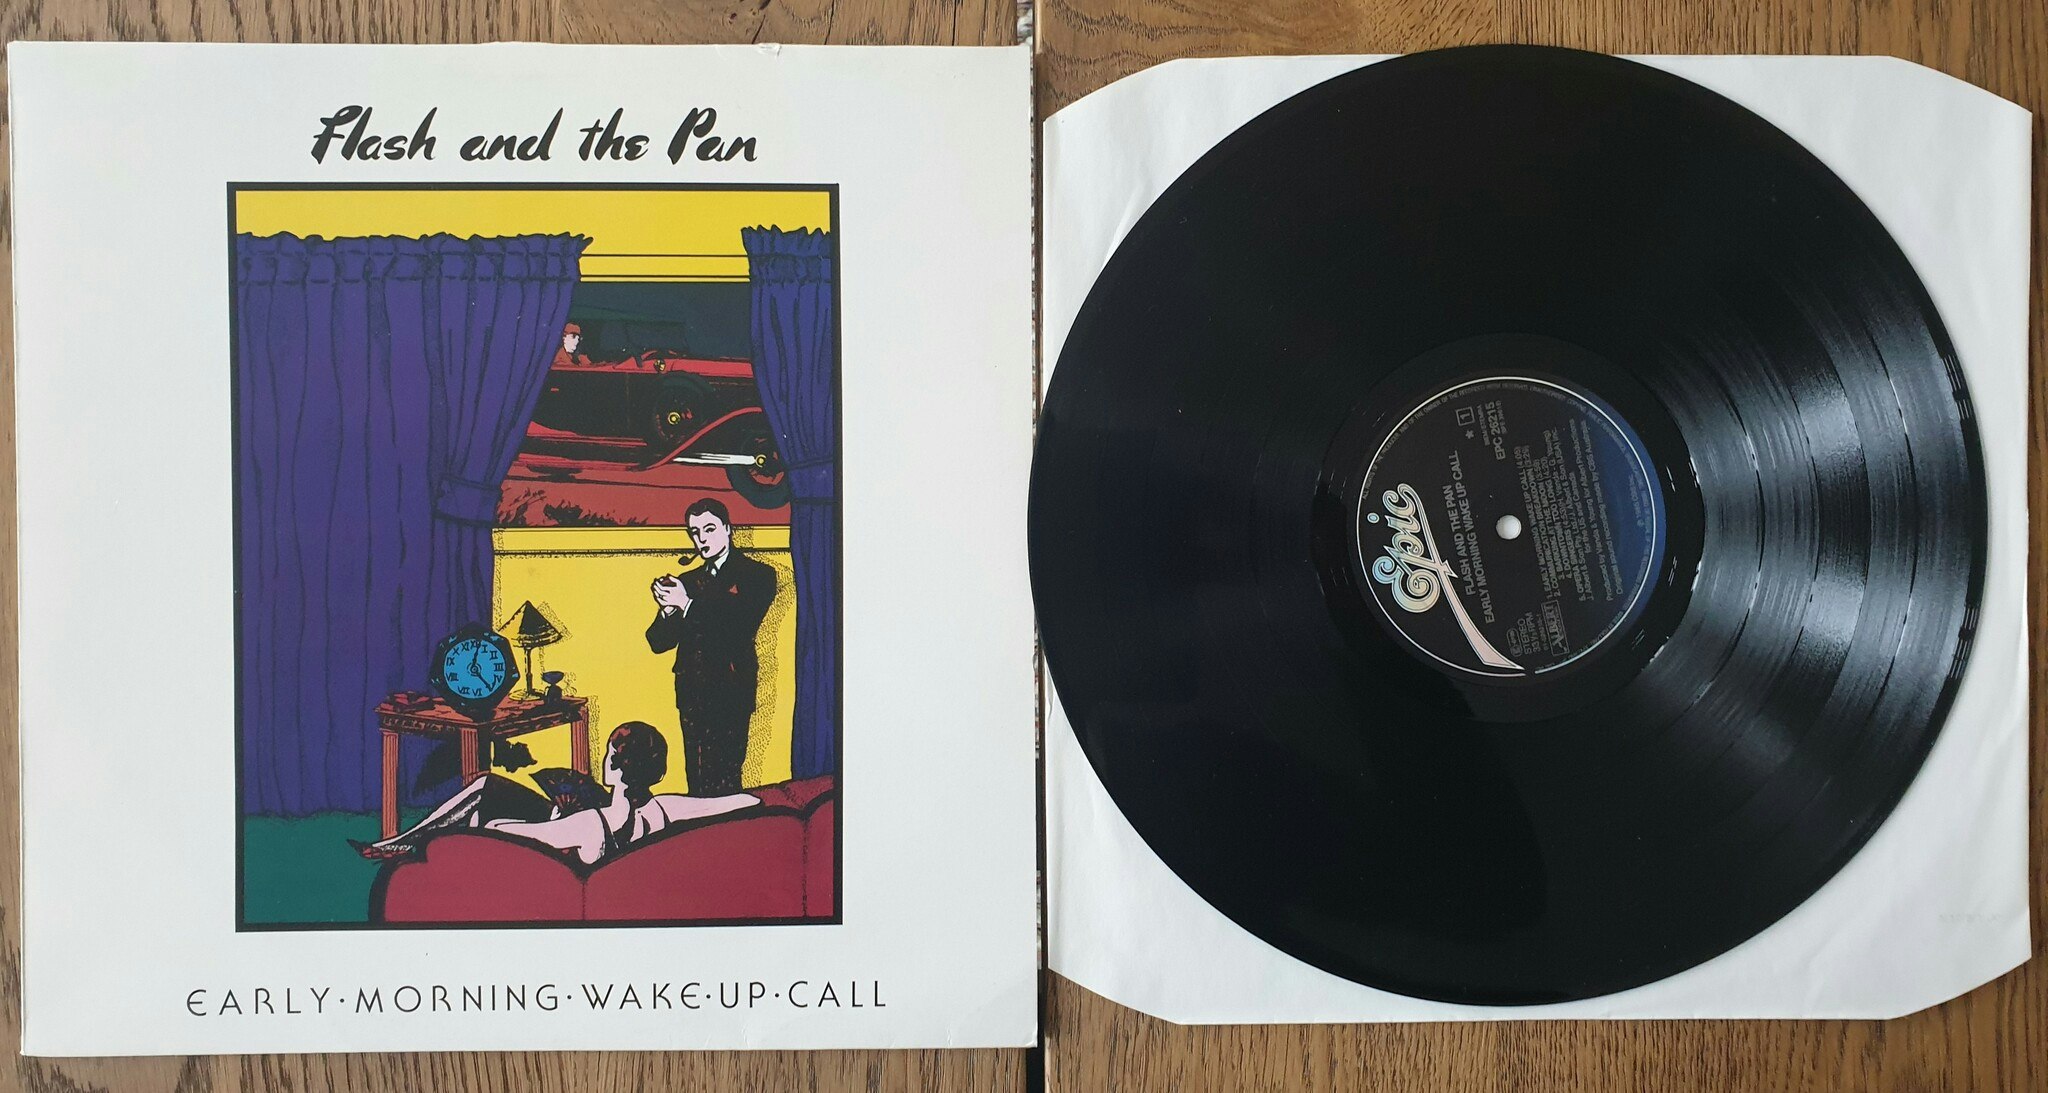 Flash and the pan, Early morning wake up call. Vinyl LP